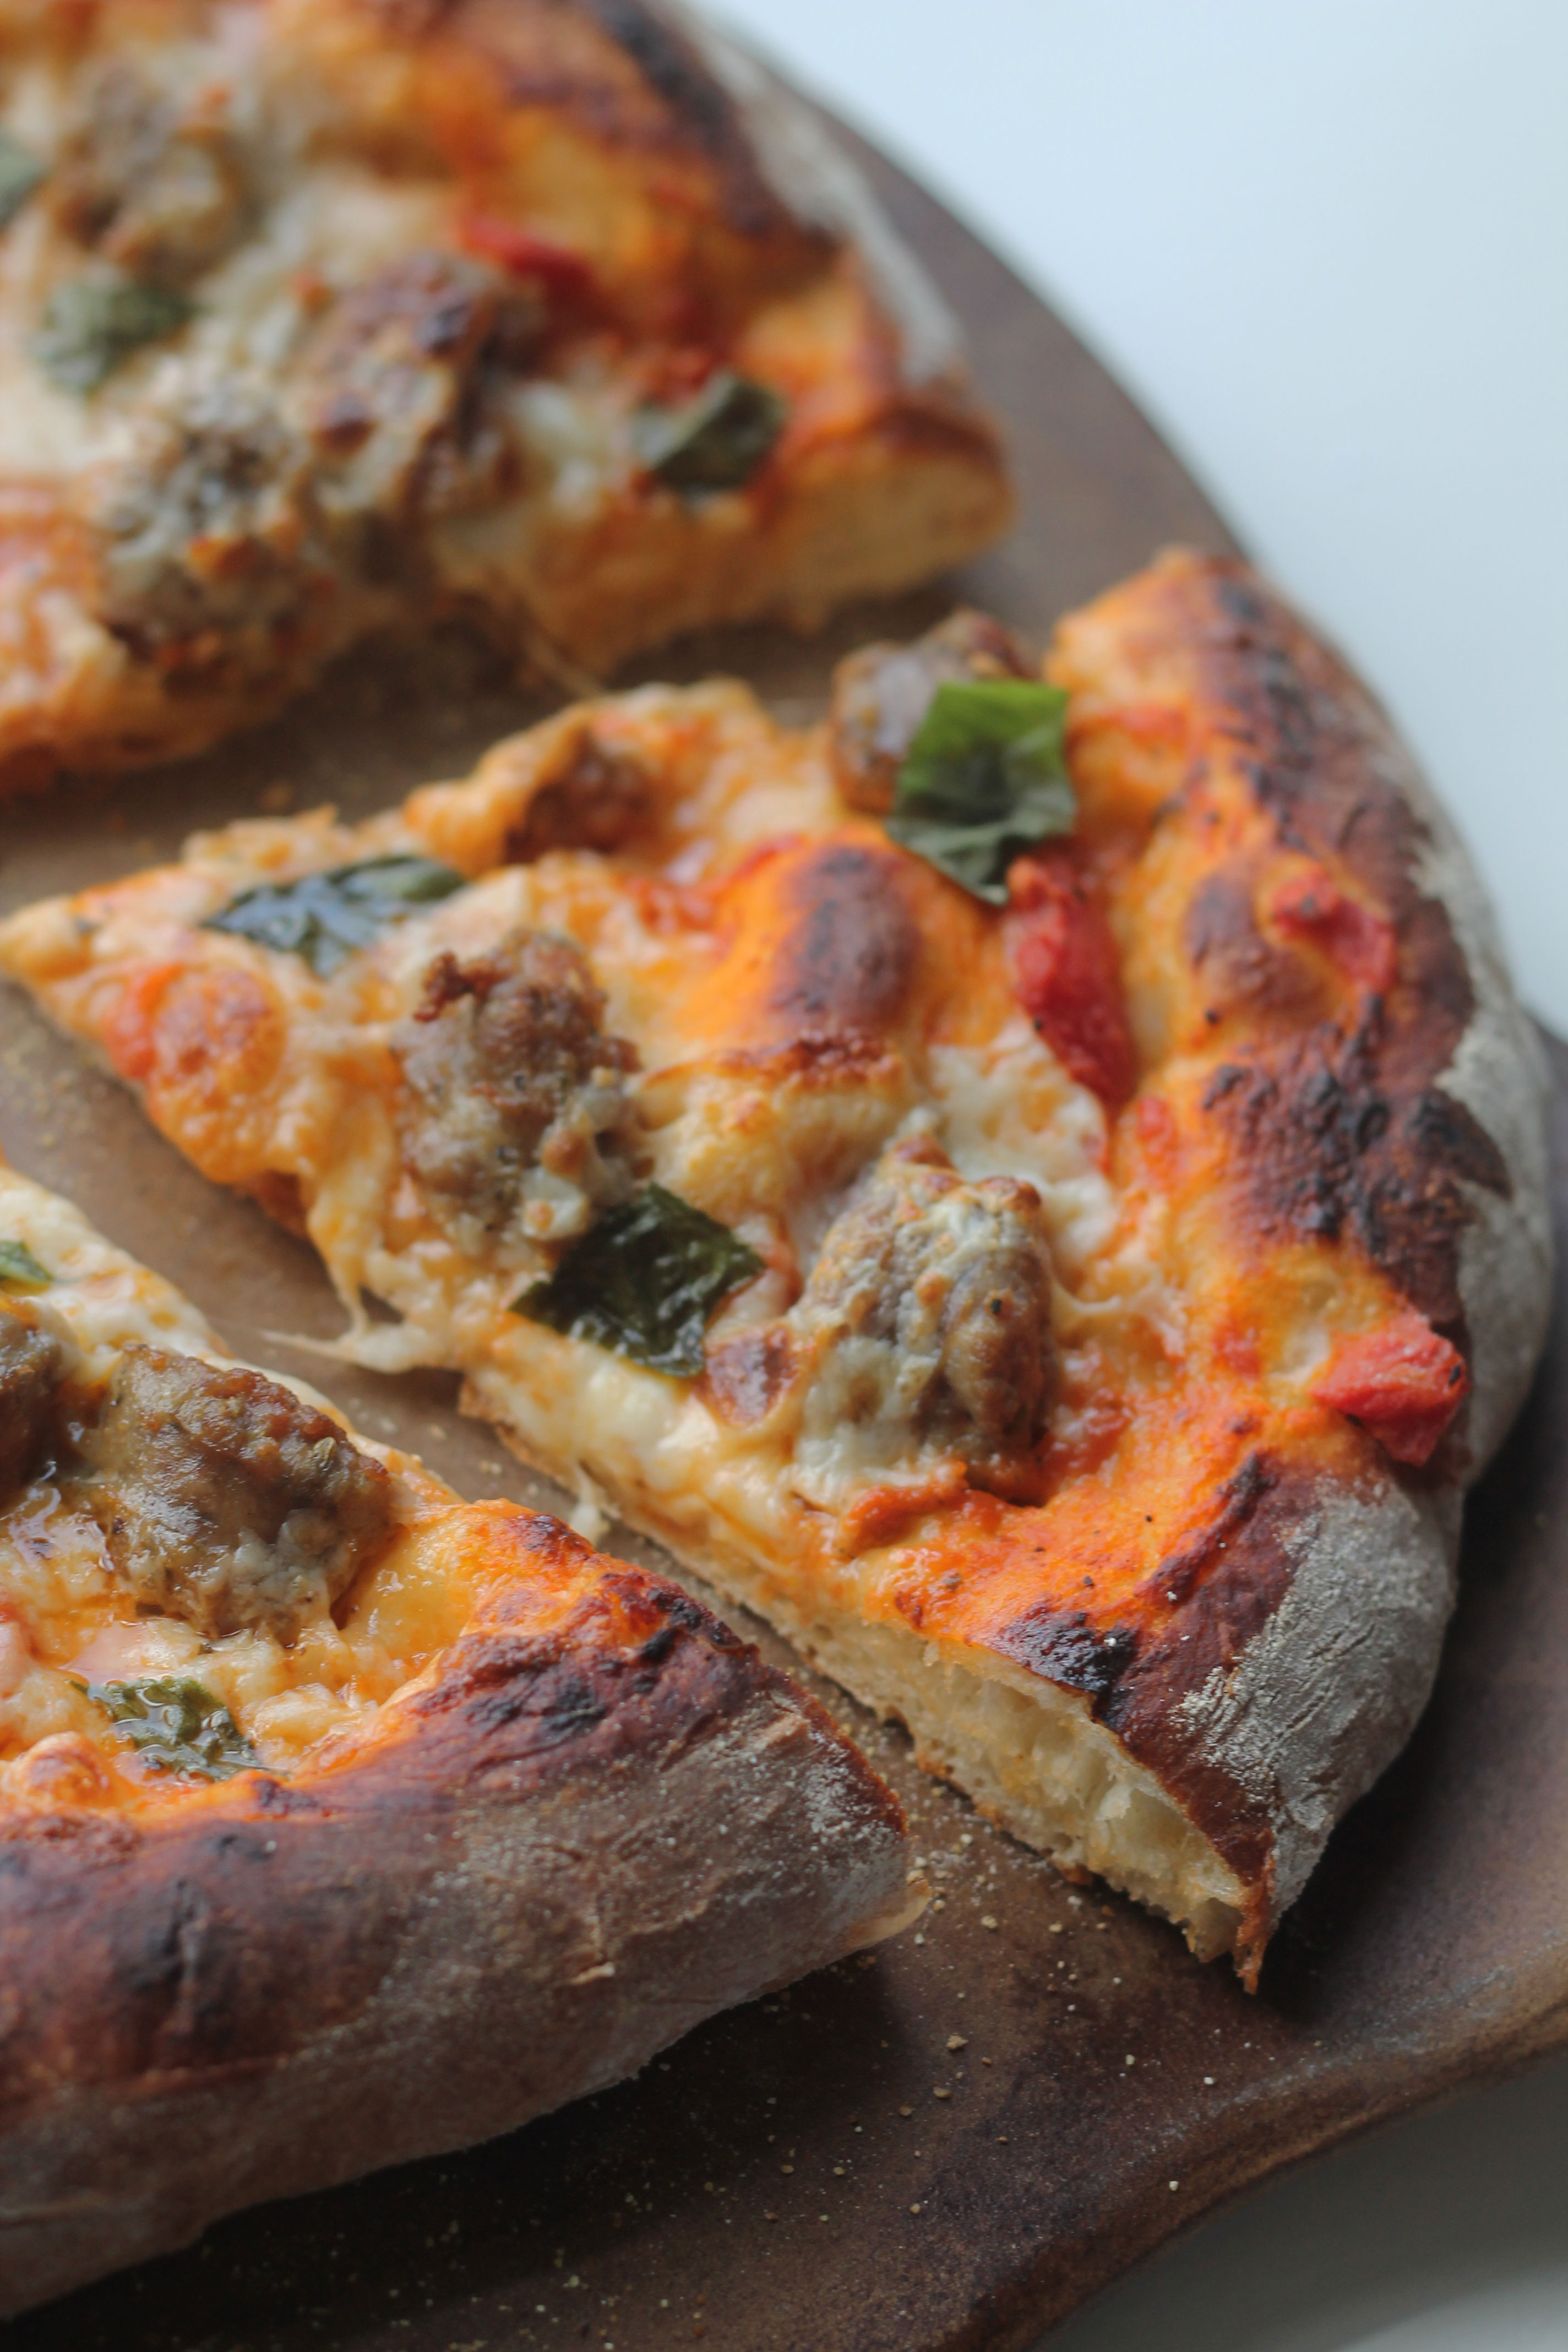 Creamy Vodka and Sausage Pizza recipe from Ken Forkish's The Elements of Pizza book